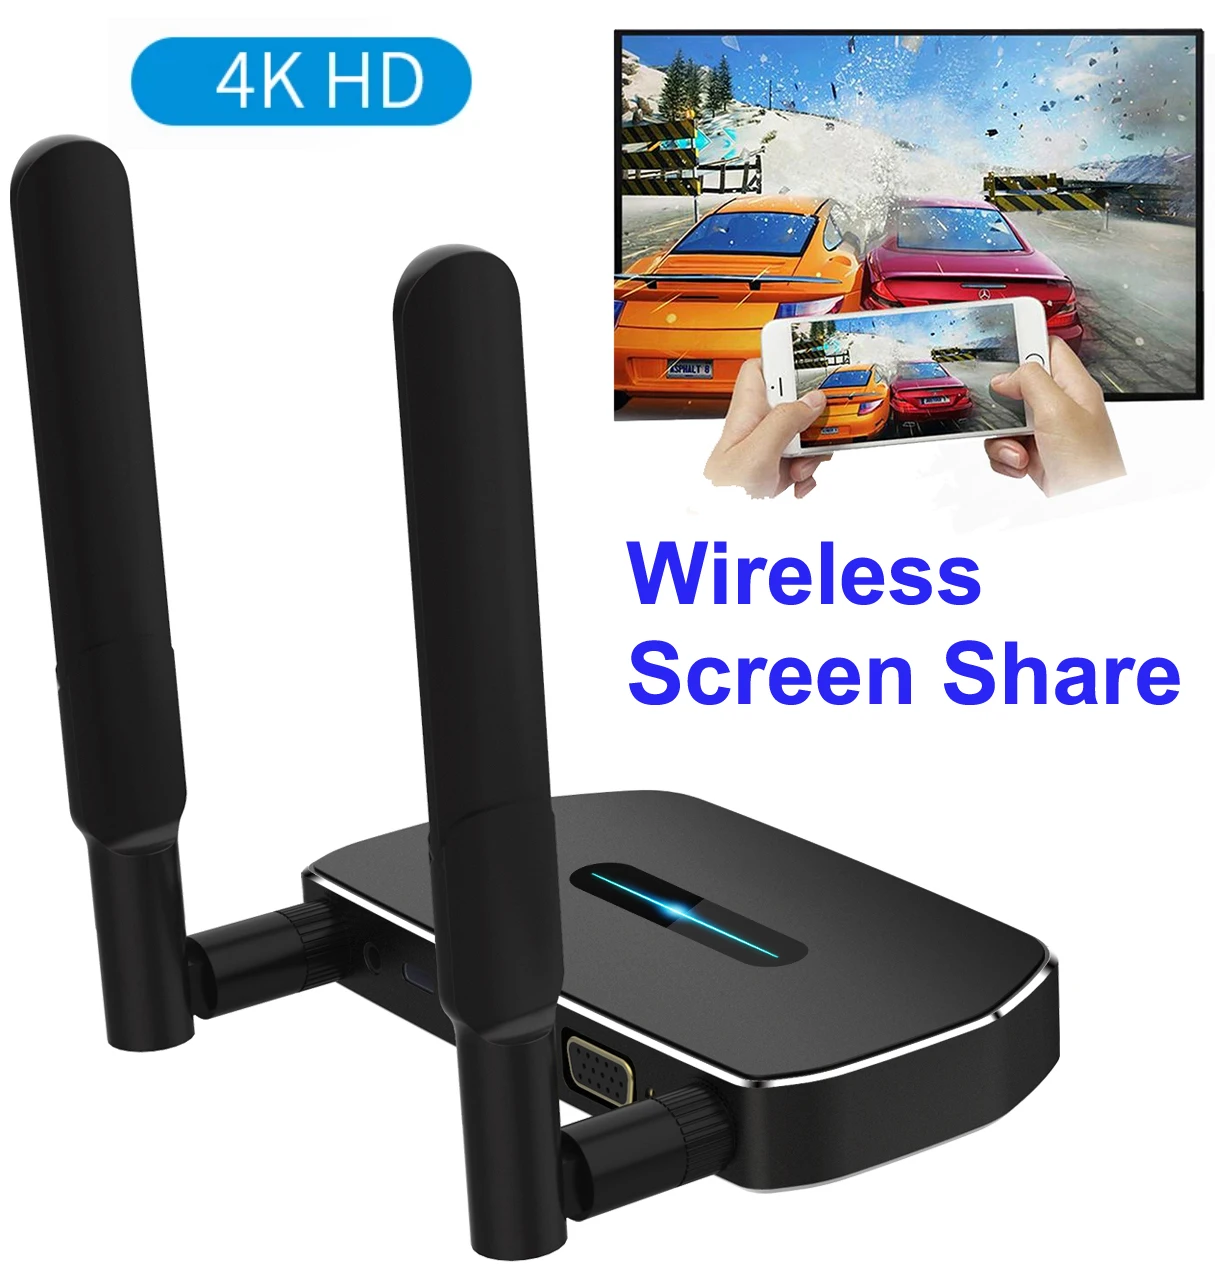 5G 4K Wireless WiFi Screen Mirror Adapter HDMI-compatible 1080P Display Dongle for IPhone Samsung Huawei Android Phone PC To TV